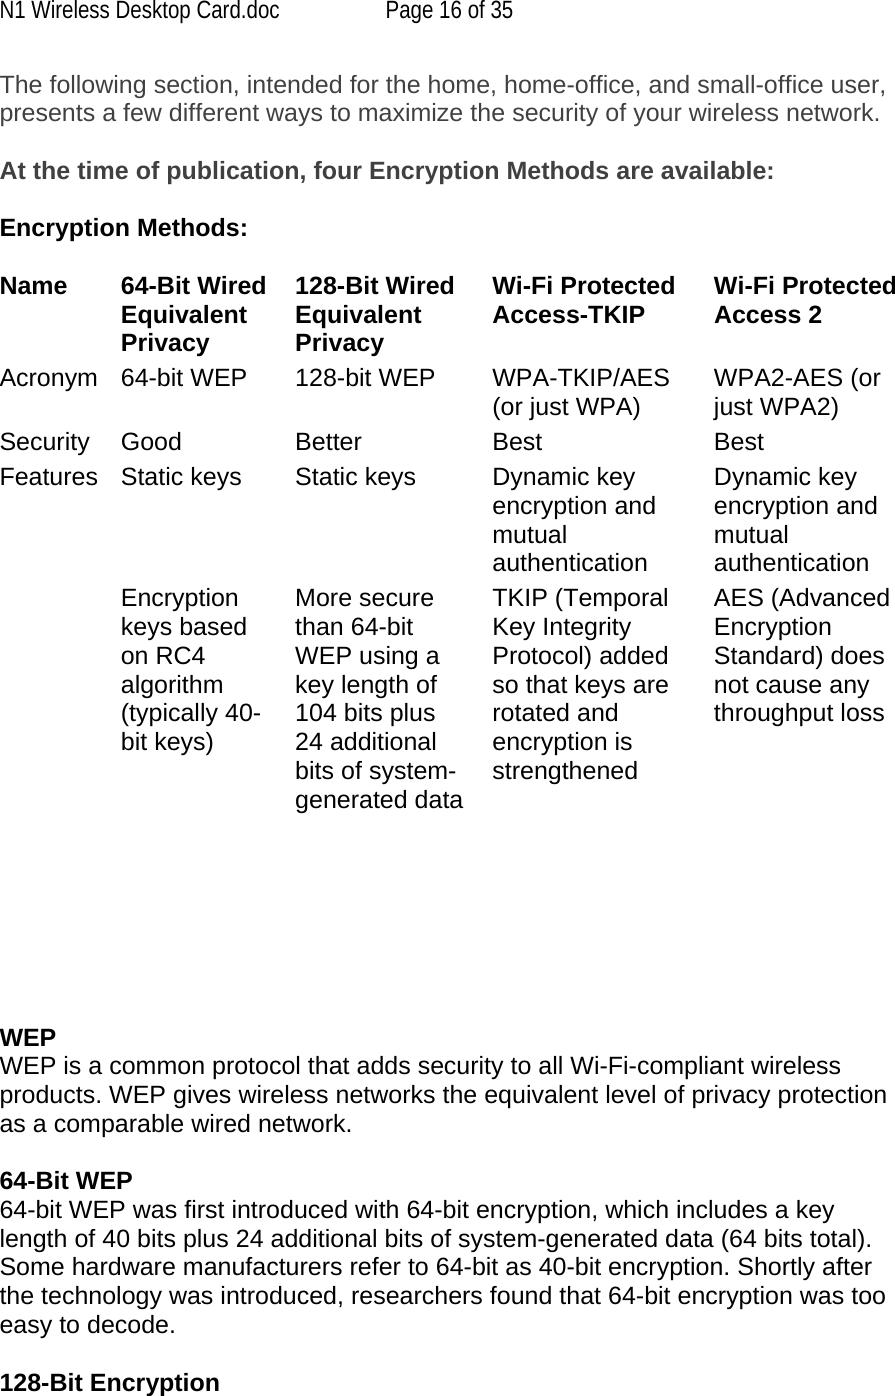 N1 Wireless Desktop Card.doc  Page 16 of 35 The following section, intended for the home, home-office, and small-office user, presents a few different ways to maximize the security of your wireless network.  At the time of publication, four Encryption Methods are available:  Encryption Methods:  Name 64-Bit Wired Equivalent Privacy128-Bit Wired Equivalent PrivacyWi-Fi Protected Access-TKIP Wi-Fi Protected Access 2 Acronym 64-bit WEP 128-bit WEP WPA-TKIP/AES (or just WPA) WPA2-AES (or just WPA2)Security Good Better Best BestFeatures Static keys  Static keys  Dynamic key encryption and mutual authenticationDynamic key encryption and mutual authentication Encryption keys based on RC4 algorithm (typically 40-bit keys)More secure than 64-bit WEP using a key length of 104 bits plus 24 additional bits of system-generated dataTKIP (Temporal Key Integrity Protocol) added so that keys are rotated and encryption is strengthenedAES (Advanced Encryption Standard) does not cause any throughput loss      WEP  WEP is a common protocol that adds security to all Wi-Fi-compliant wireless products. WEP gives wireless networks the equivalent level of privacy protection as a comparable wired network.  64-Bit WEP 64-bit WEP was first introduced with 64-bit encryption, which includes a key length of 40 bits plus 24 additional bits of system-generated data (64 bits total). Some hardware manufacturers refer to 64-bit as 40-bit encryption. Shortly after the technology was introduced, researchers found that 64-bit encryption was too easy to decode.  128-Bit Encryption 